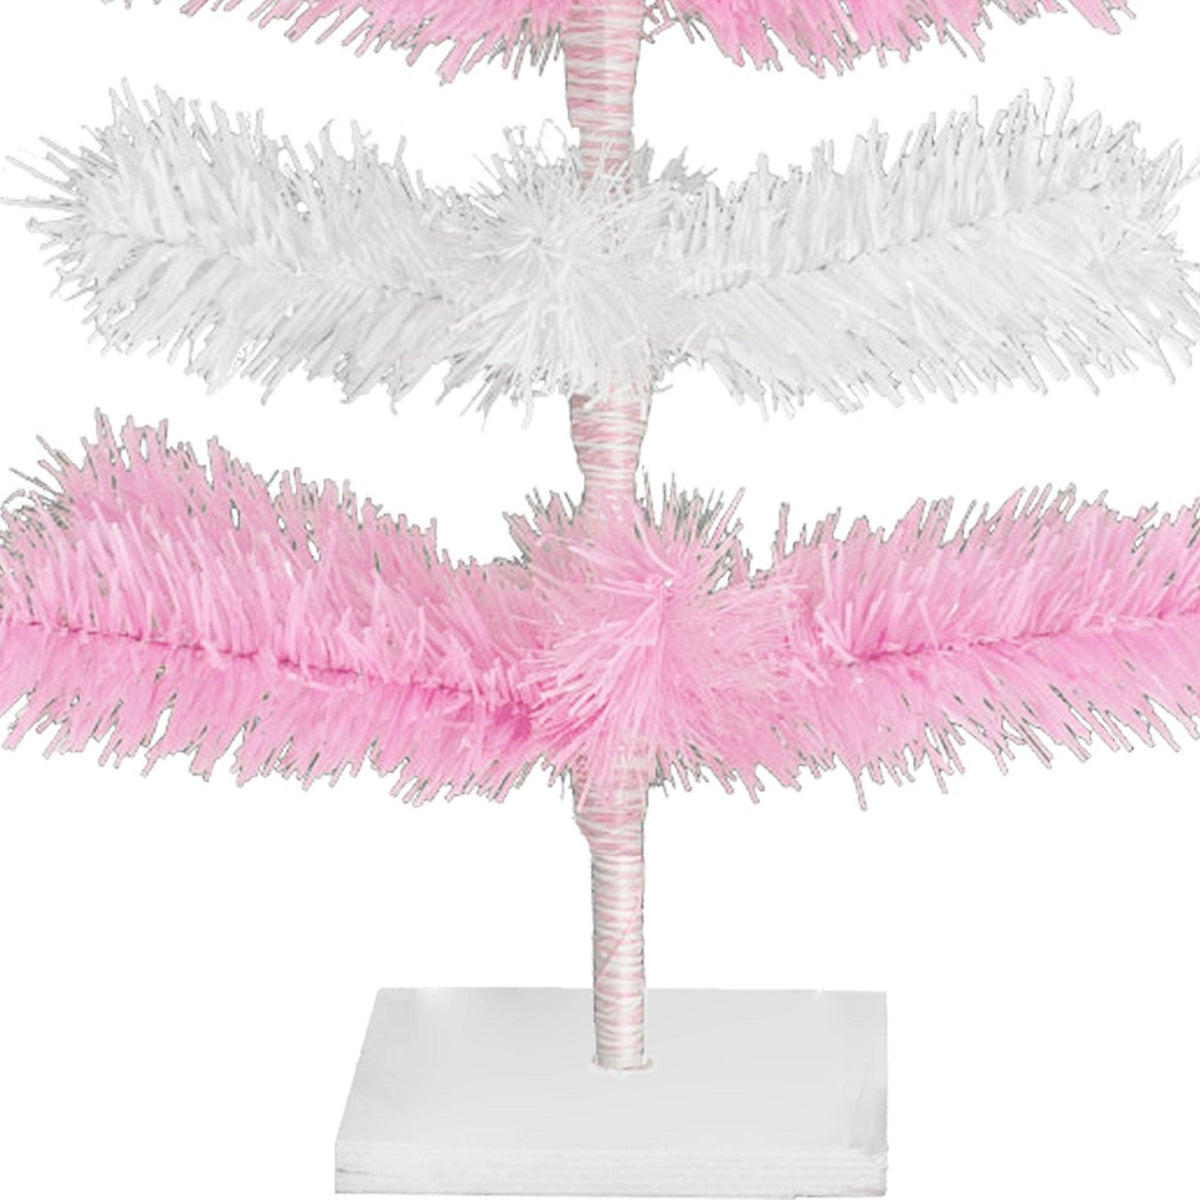 Pink & White Layered Tinsel Christmas Trees! Decorate for the holidays with a Shiny Pink and Matte White retro-style Christmas Tree. Incorporate a little purple and white into your holiday decorations this year. On sale at leedisplay.com